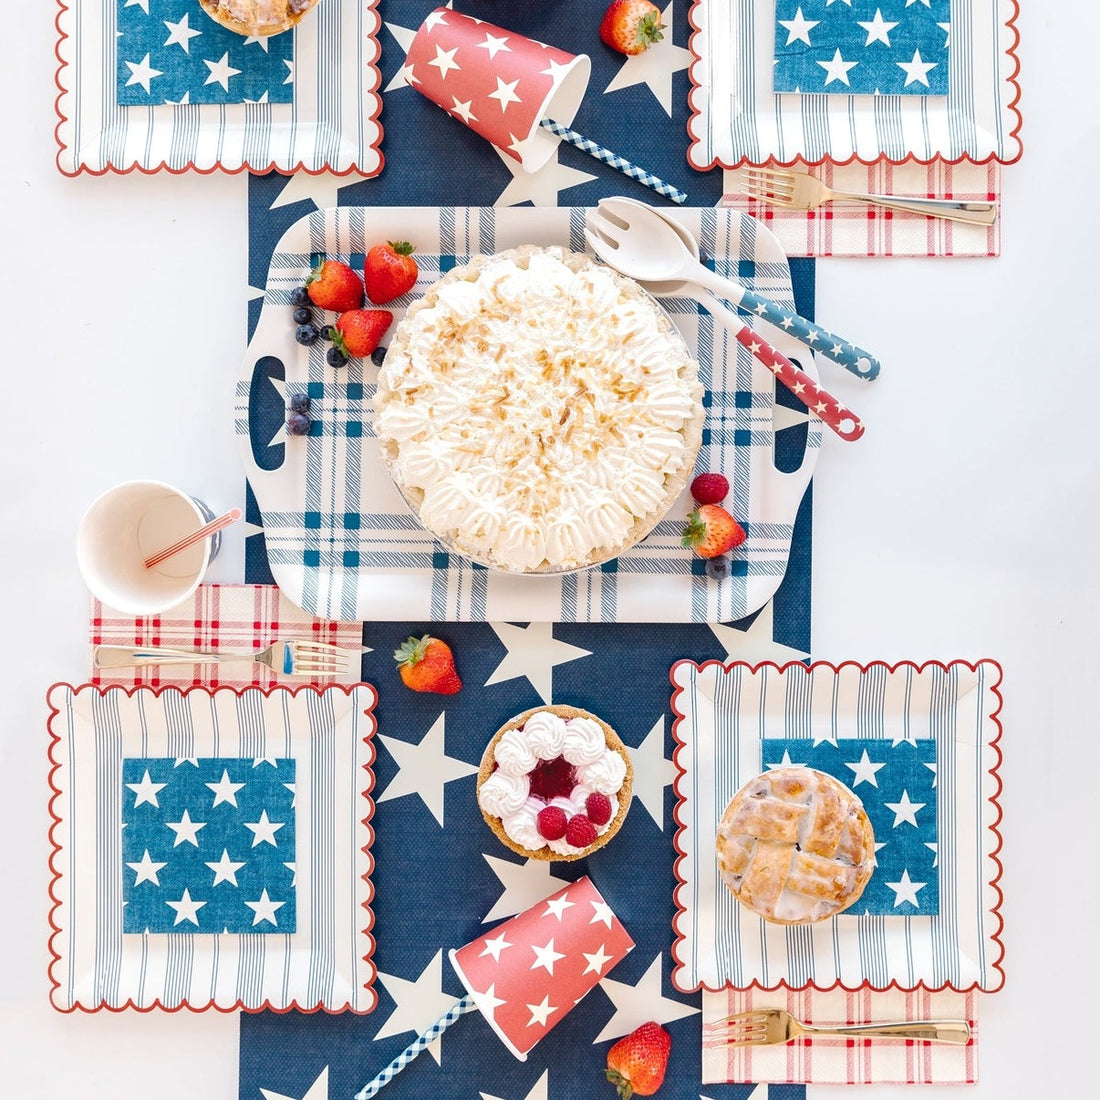 Red, white &amp; blue themed table setting.